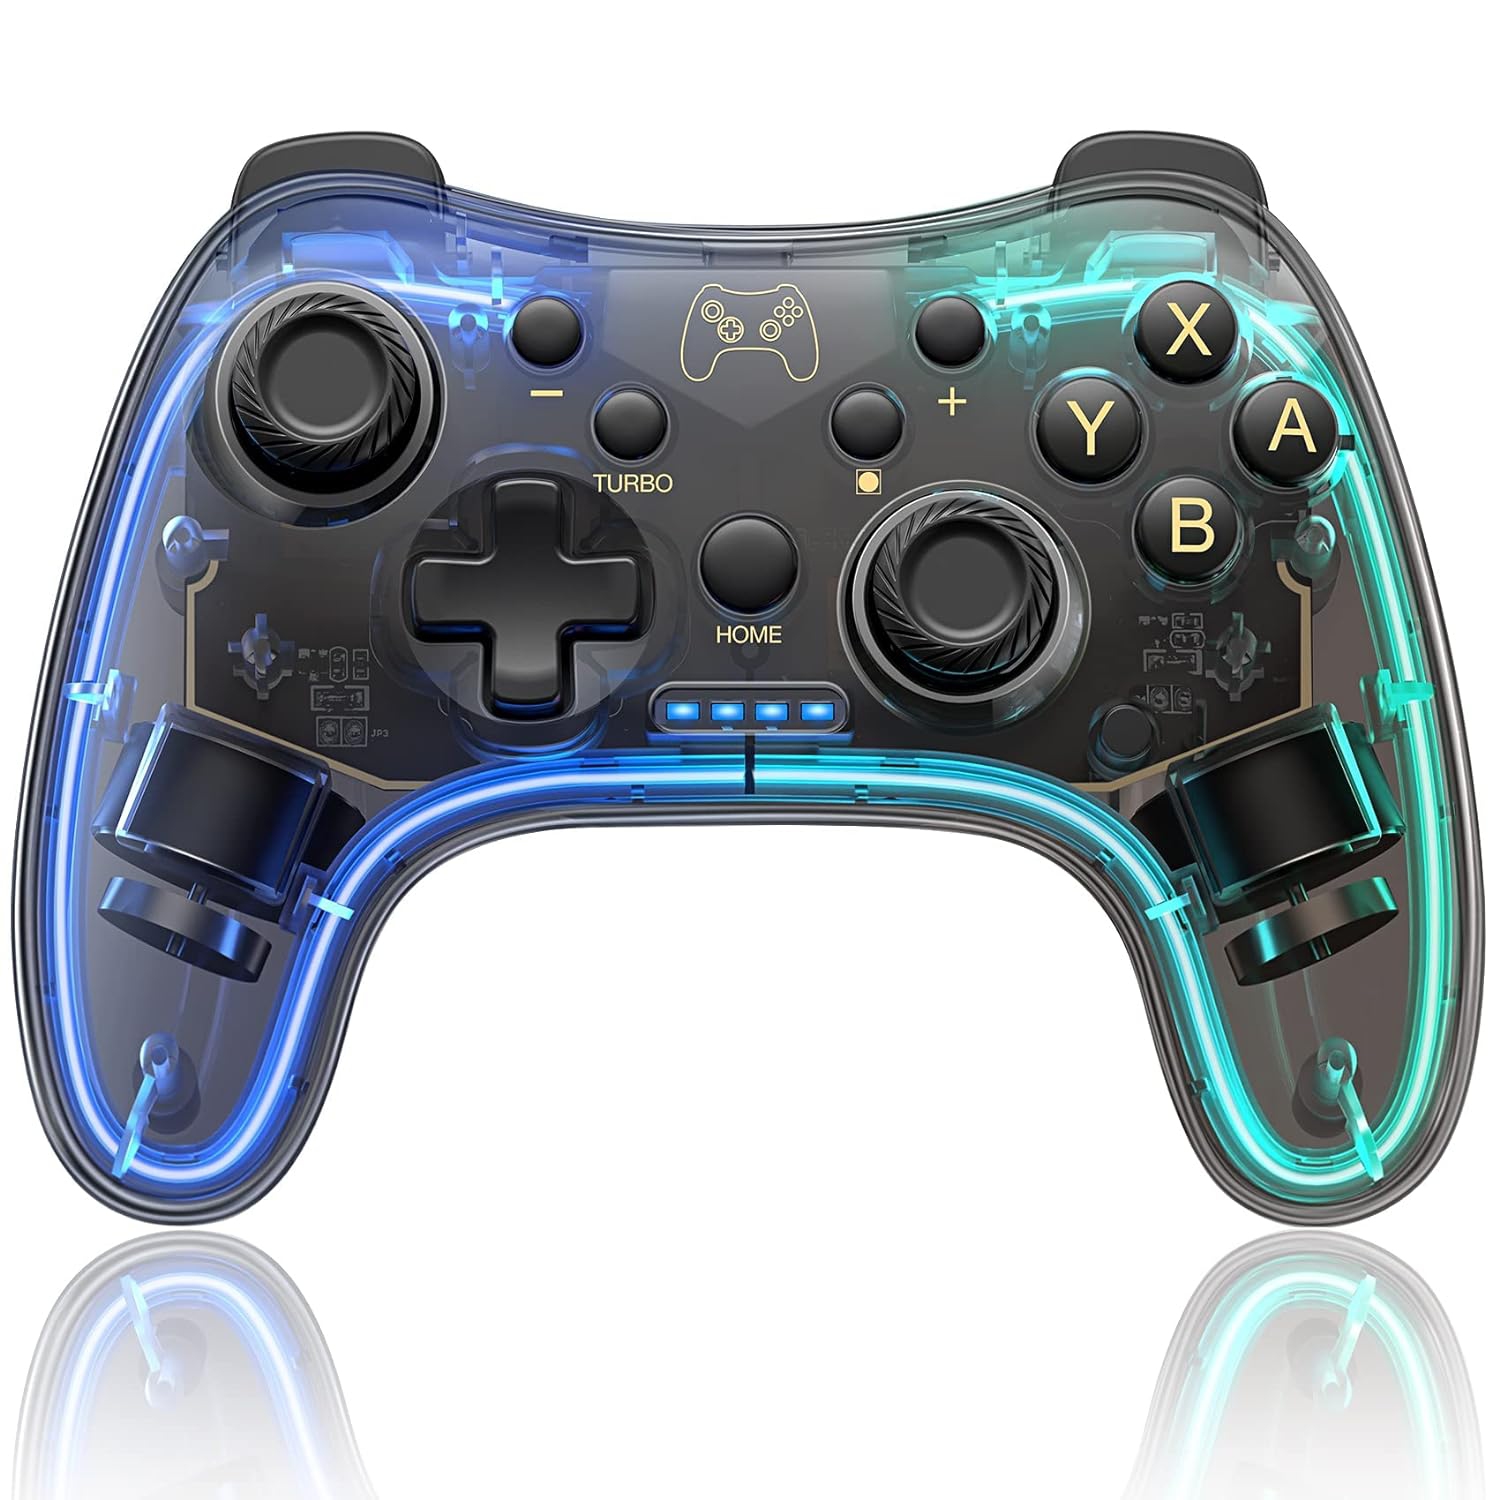 BoostBlossom A Switch Pro Controller that's compatible with Nintendo Switch, Switch Lite, Switch OLED, as well as PC, Android, and iOS devices. This controller features RGB Breathi